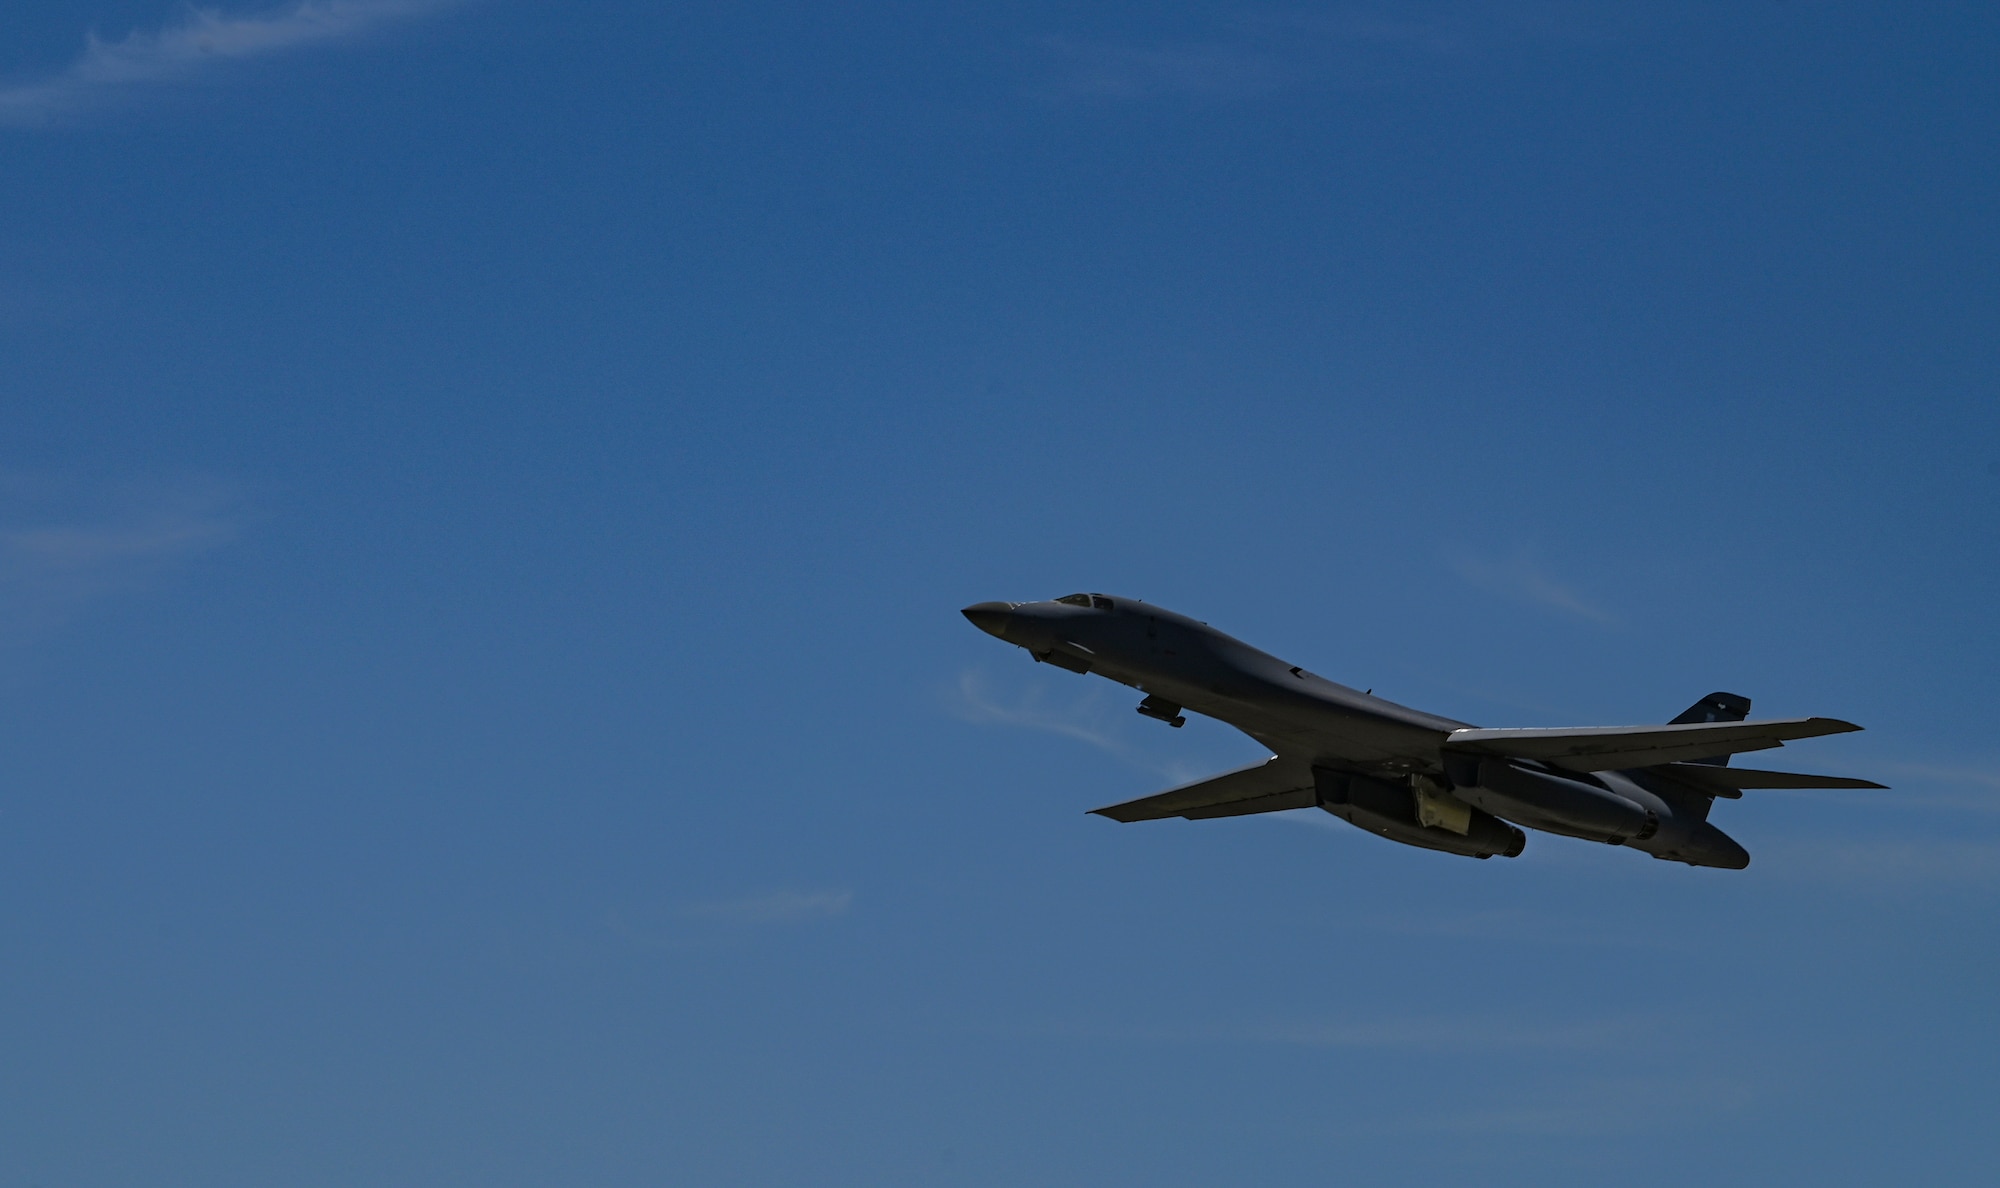 A B-1B Lancer takes off during a fini-flight for U.S. Air Force Col. Kevin Kippie, 7th Bomb Wing vice commander, at Dyess Air Force Base, Texas, June 29, 2023. Kippie served at Dyess from June 11, 2021, to June 16, 2023. While at Dyess, Kippie was committed to excellence as he fostered financial innovation and proposals for the installation, created a Wing Welcome Center for new Airmen and worked in integrated teams to action the wing’s fiscal efforts. (U.S. Air Force photo by Airman 1st Class Emma Anderson)